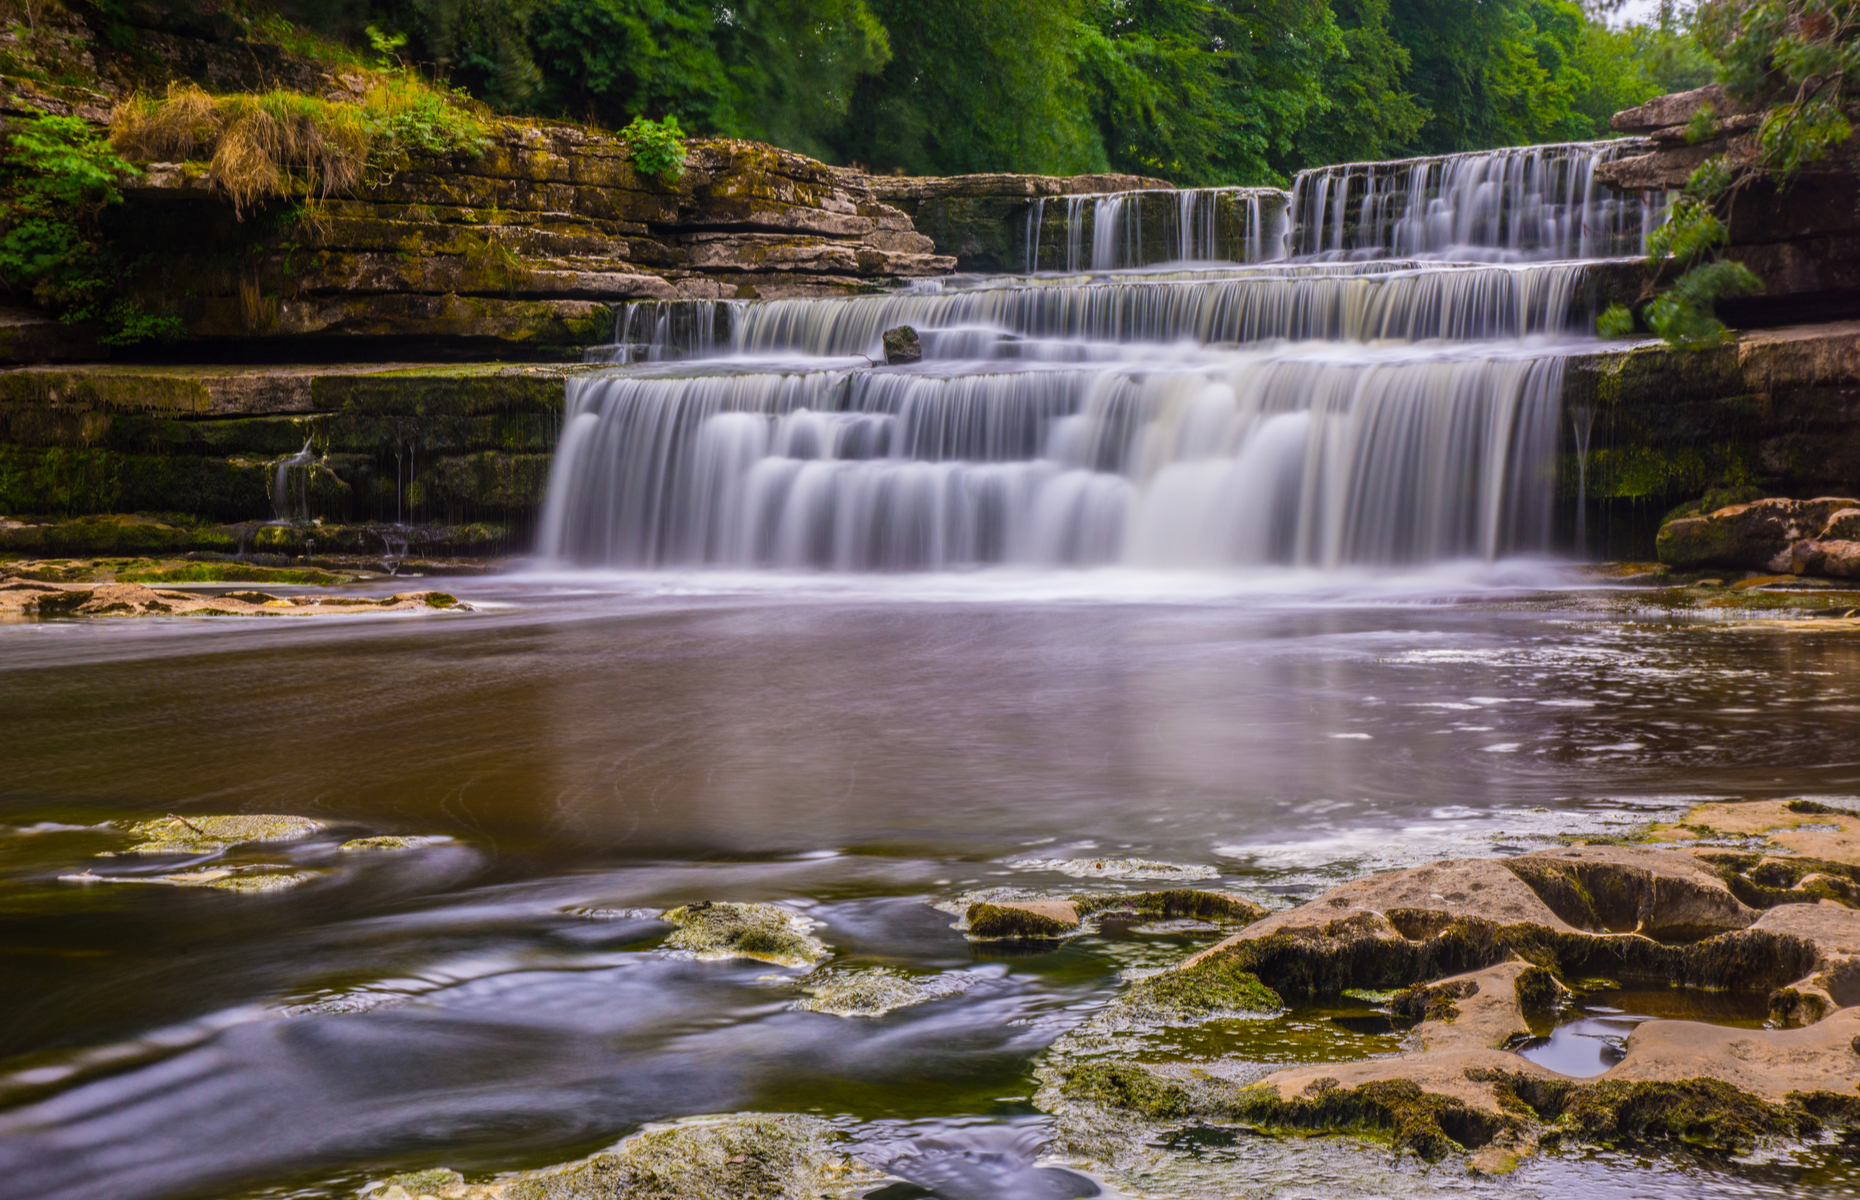 Aysgarth Falls in north Yorkshire (image: andybphotography/Shutterstock)